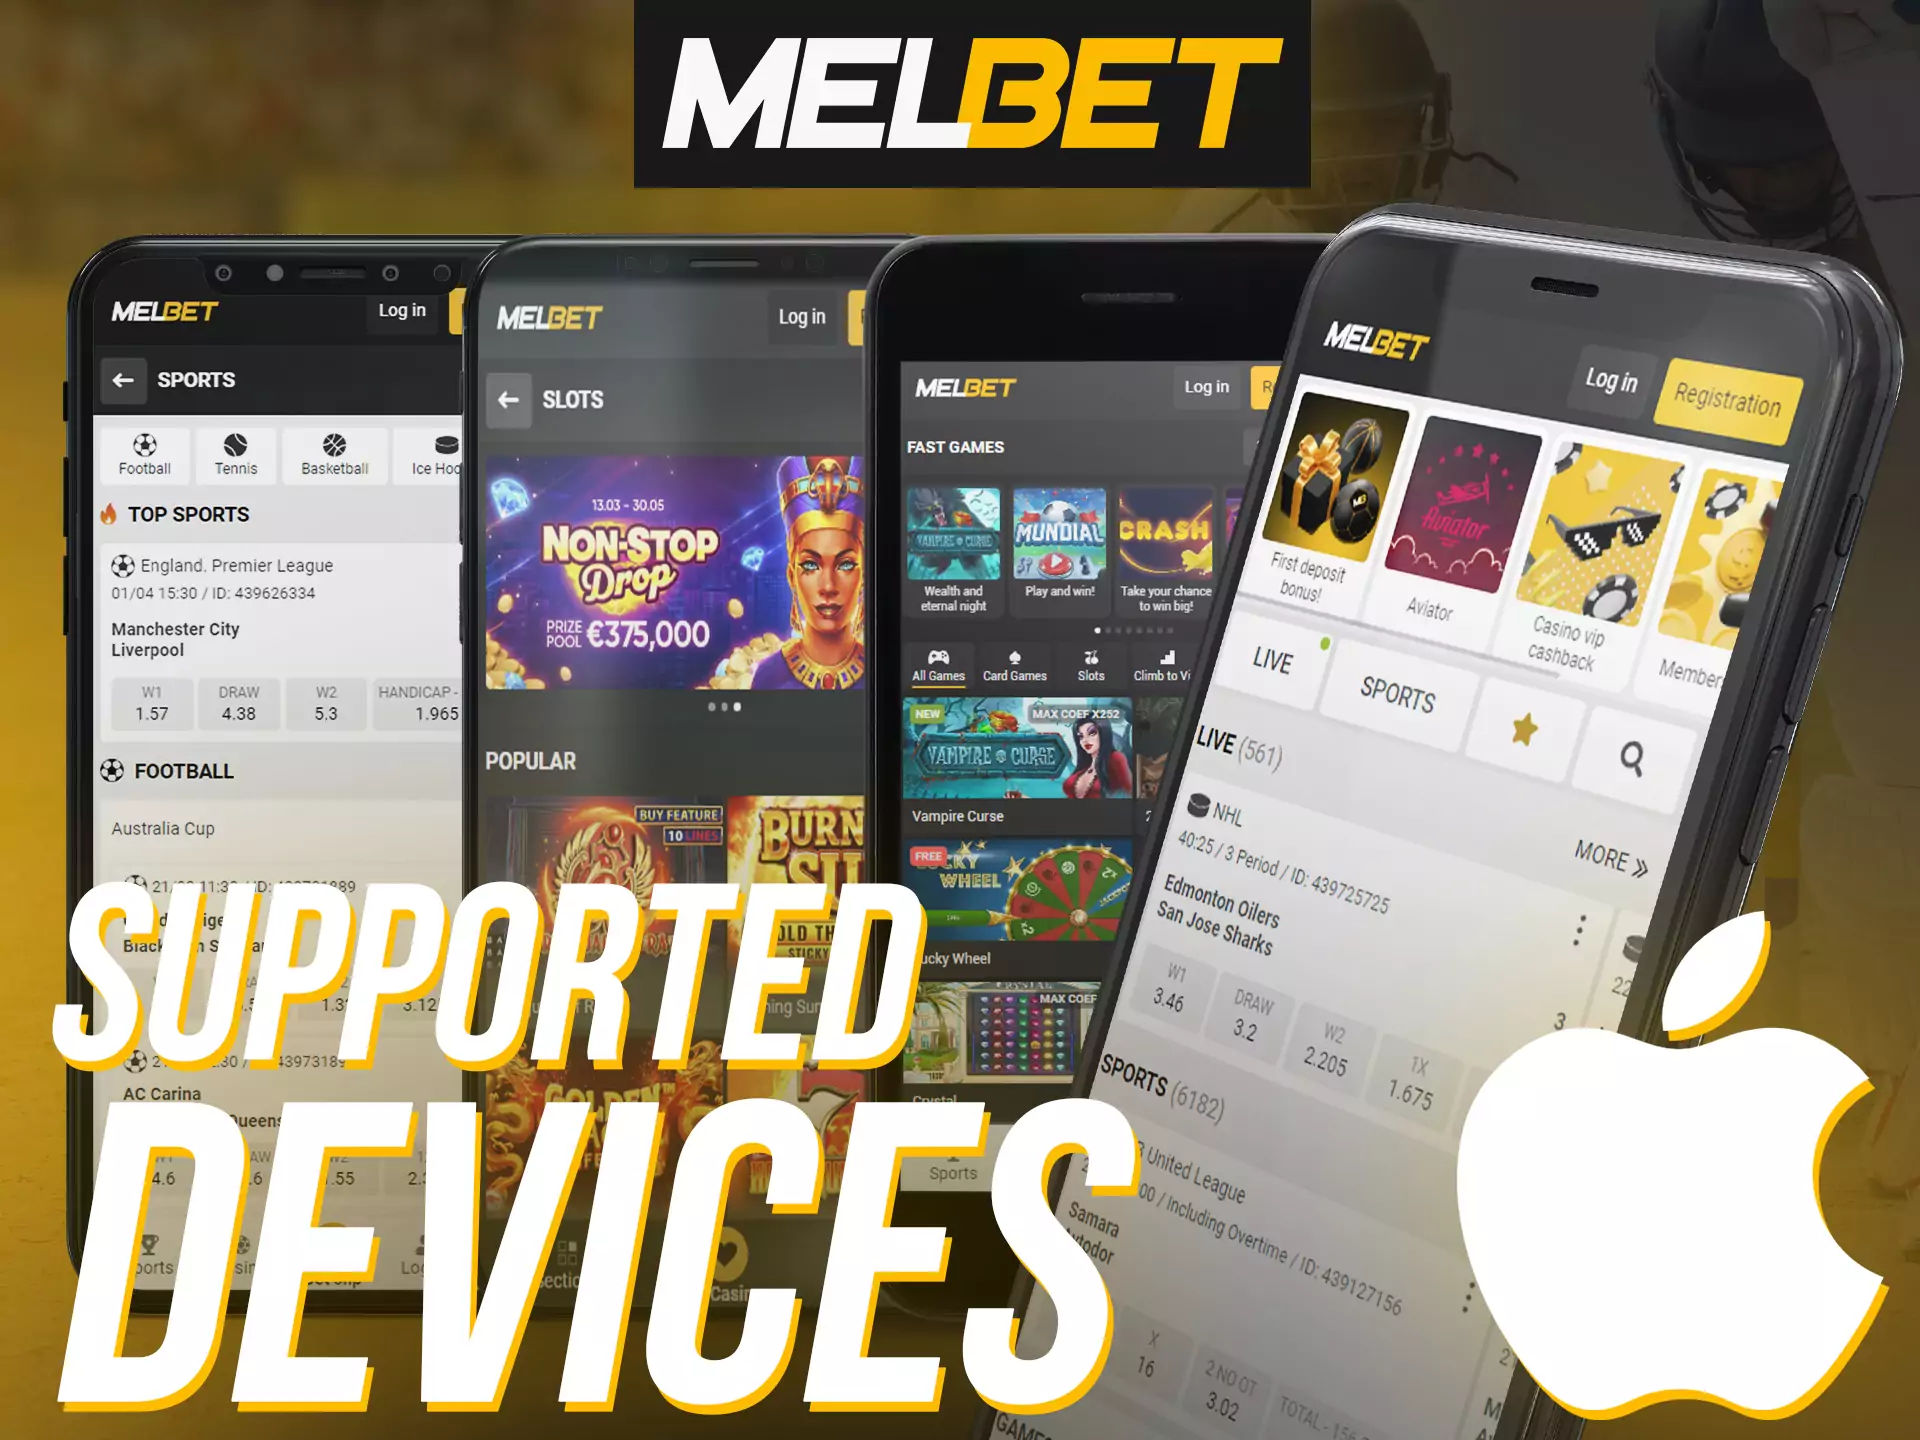 The Melbet app can be installed on various iOS devices.